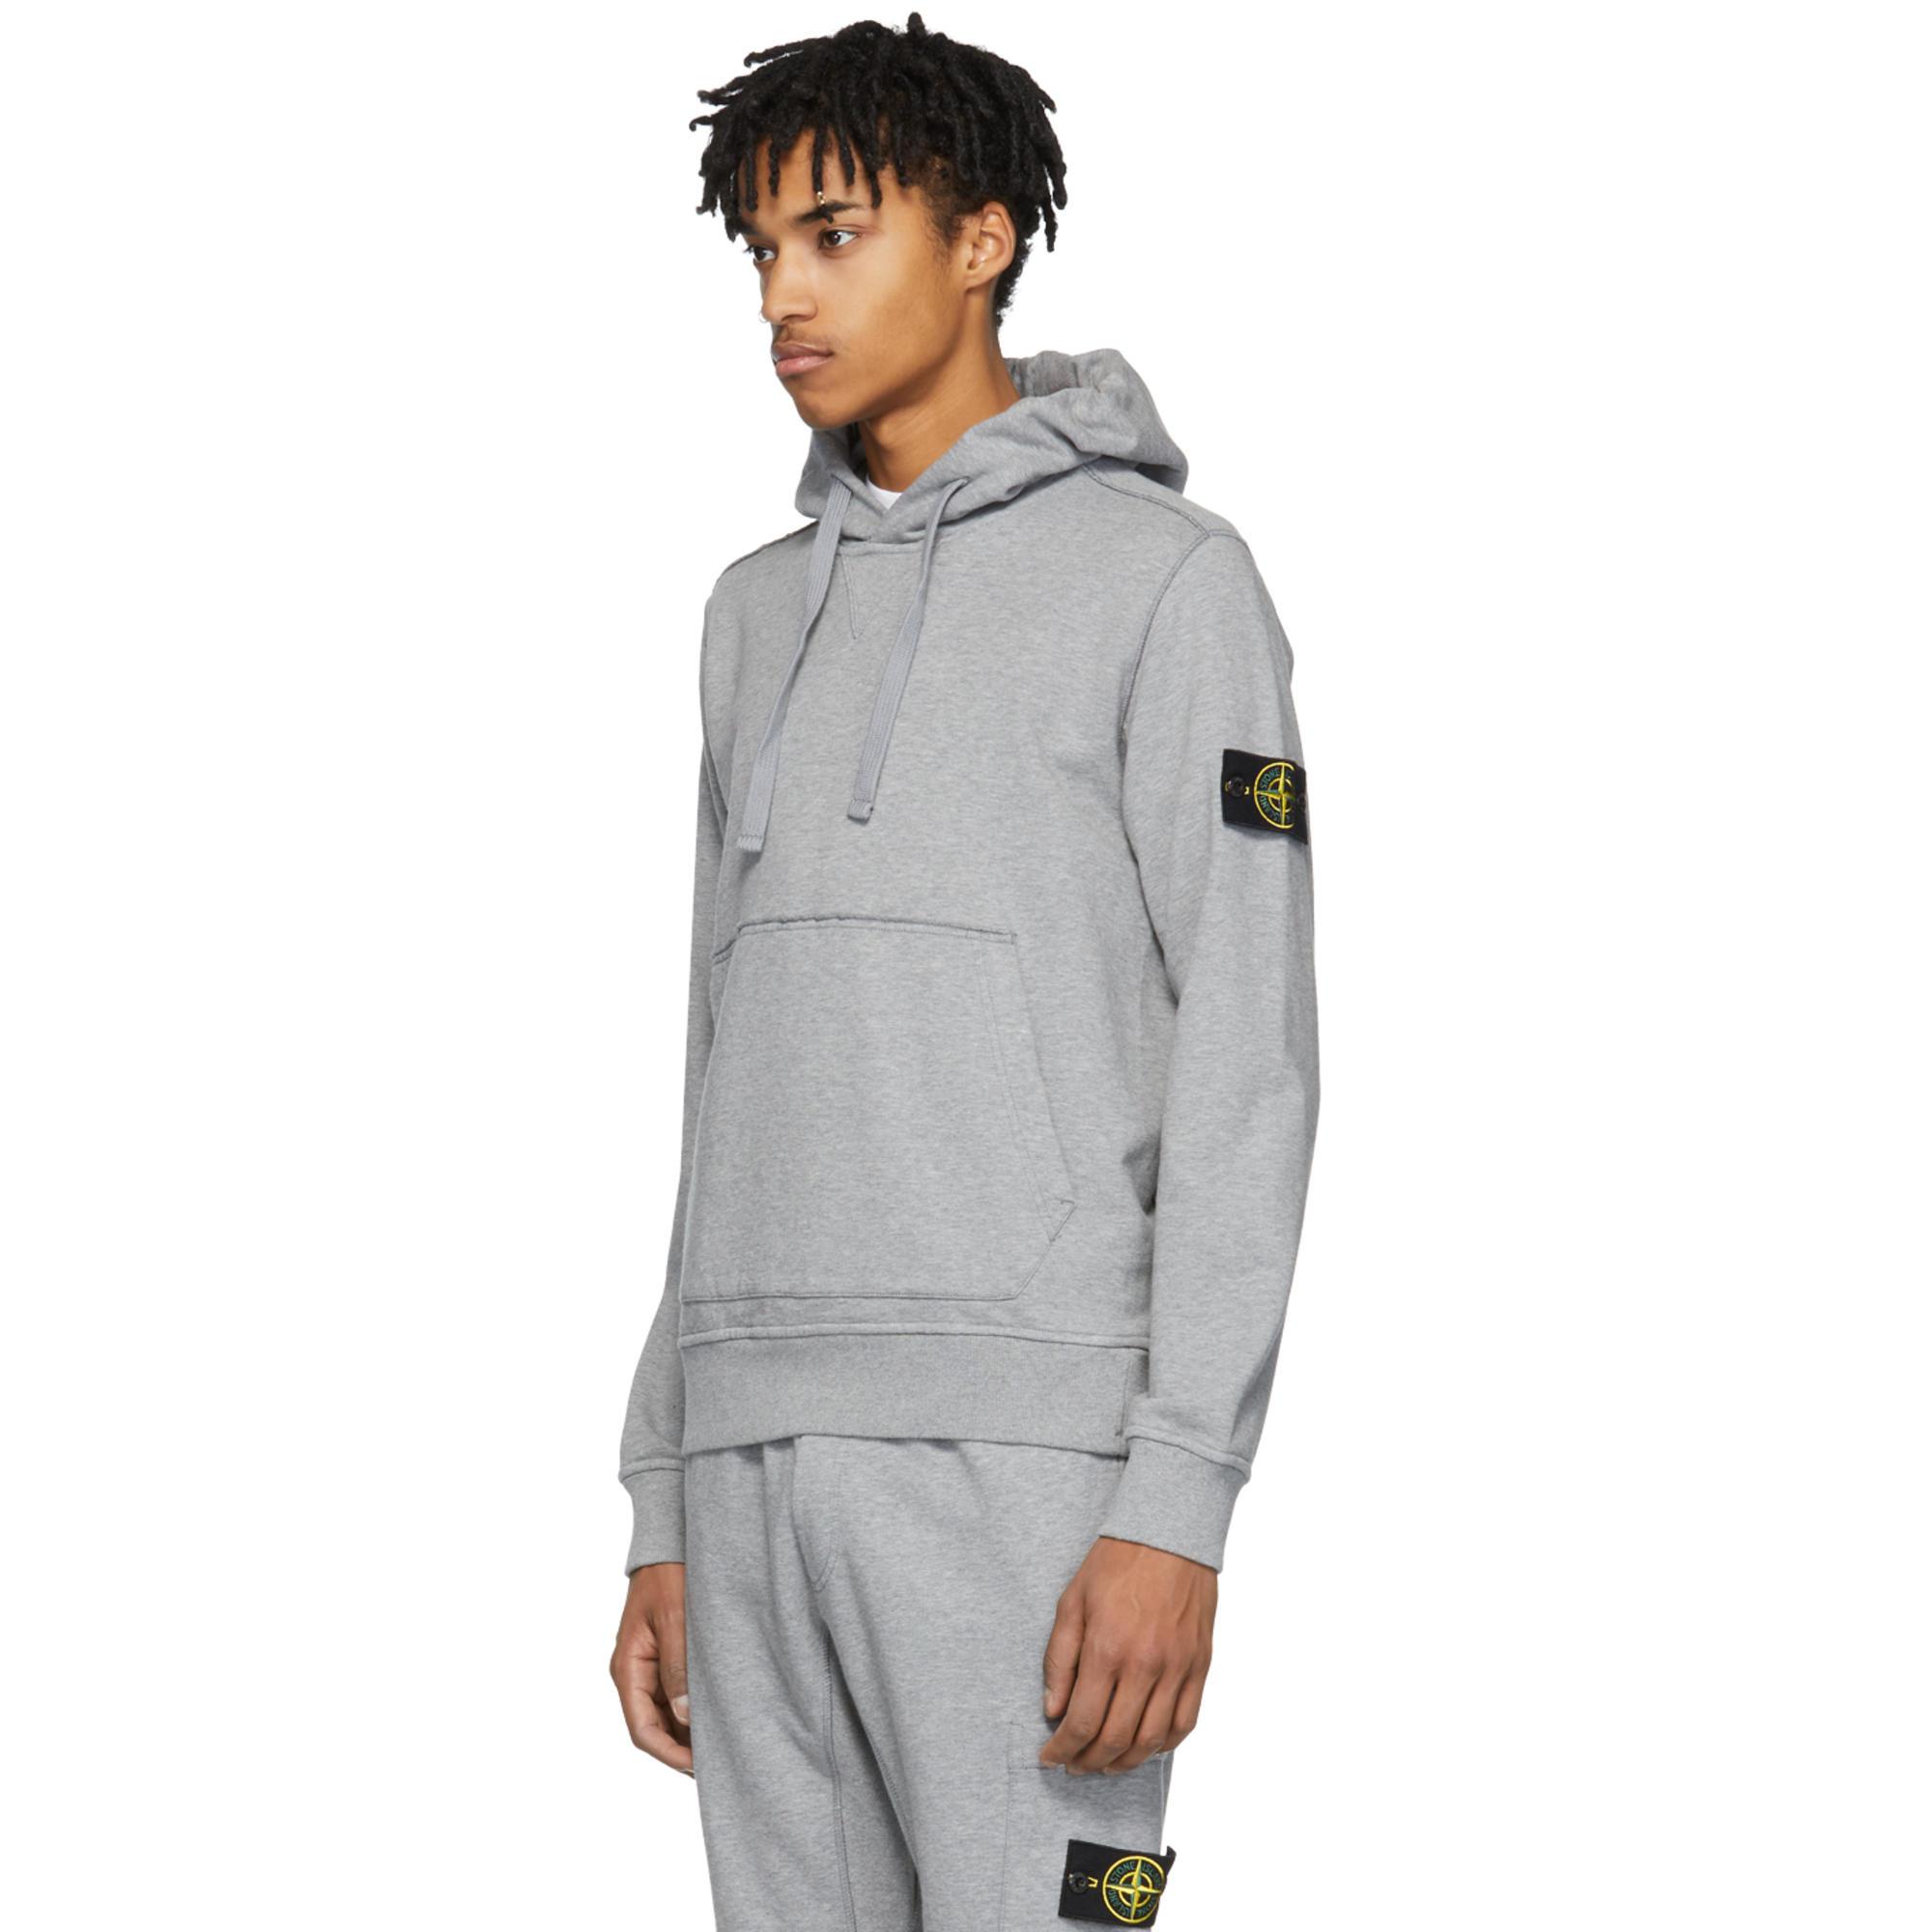 Lyst - Stone Island Grey Arm Badge Hoodie in Gray for Men